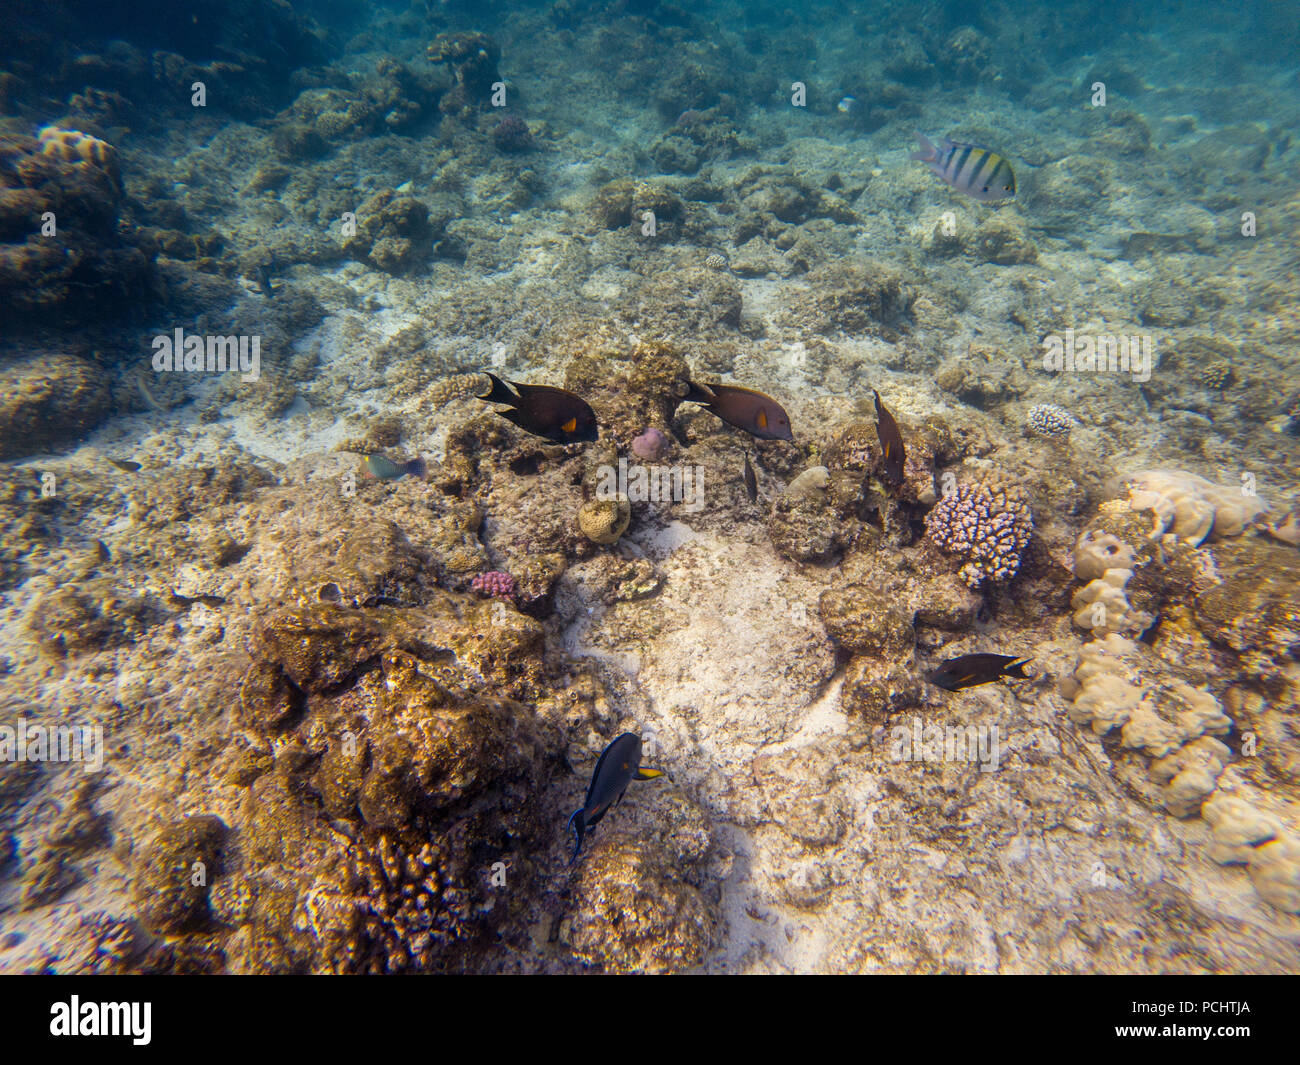 Black surgeonfish swimming by coral reef Stock Photo